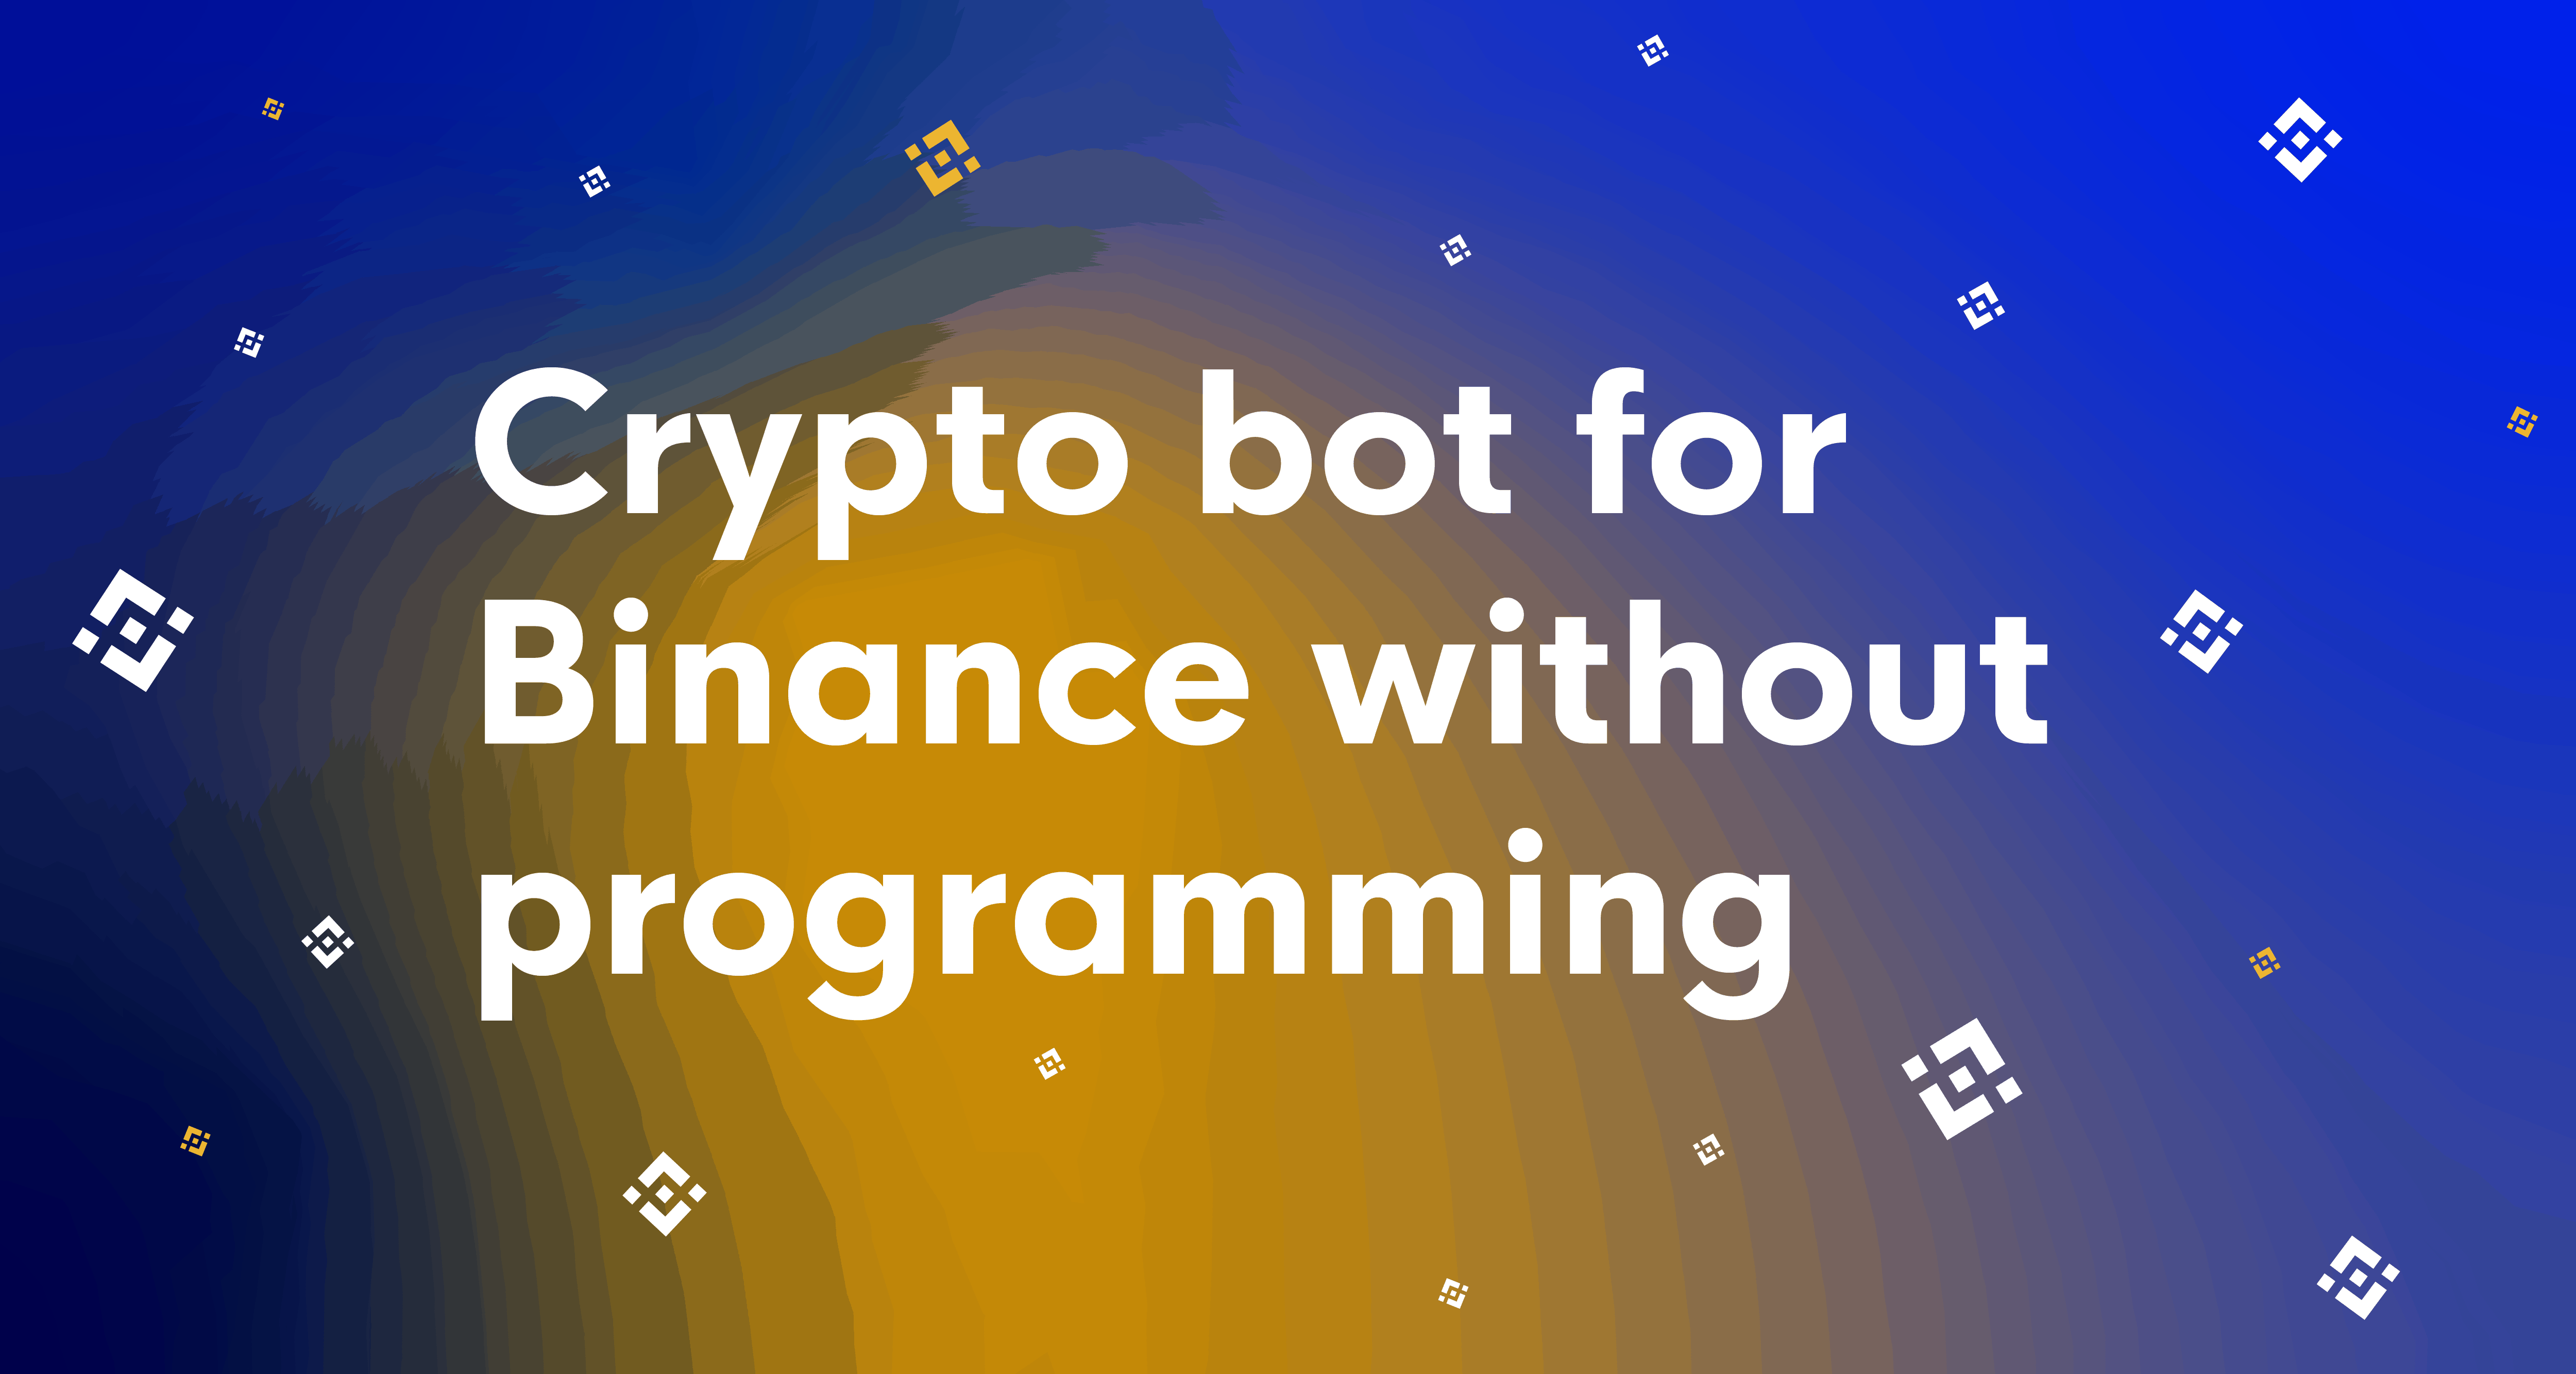 Crypto bot for Binance without programing